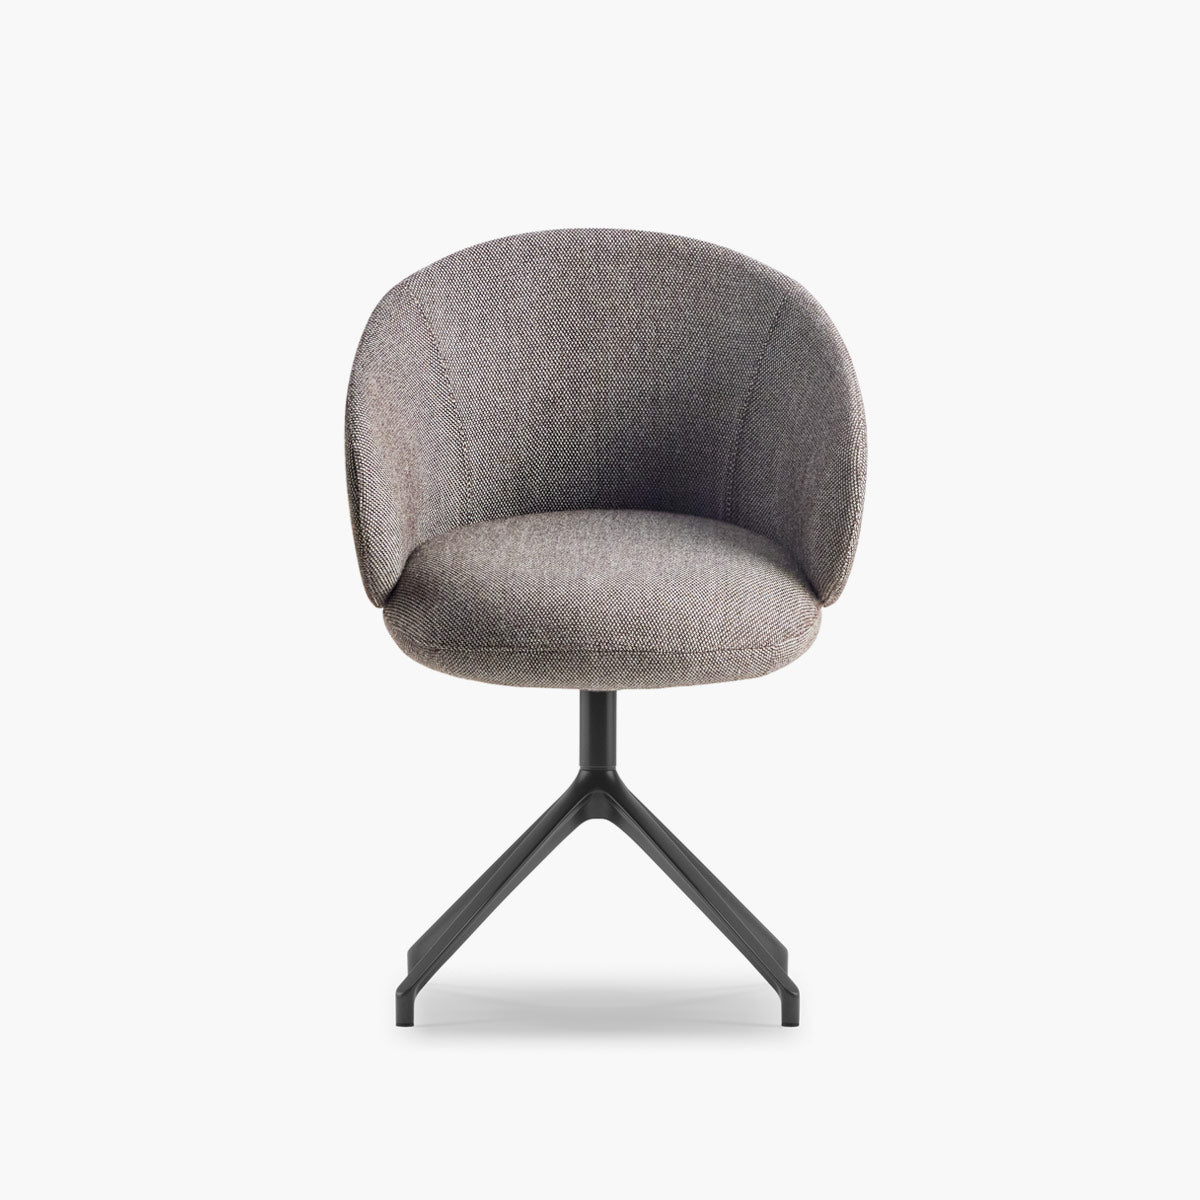 Pottolo Meeting Chair